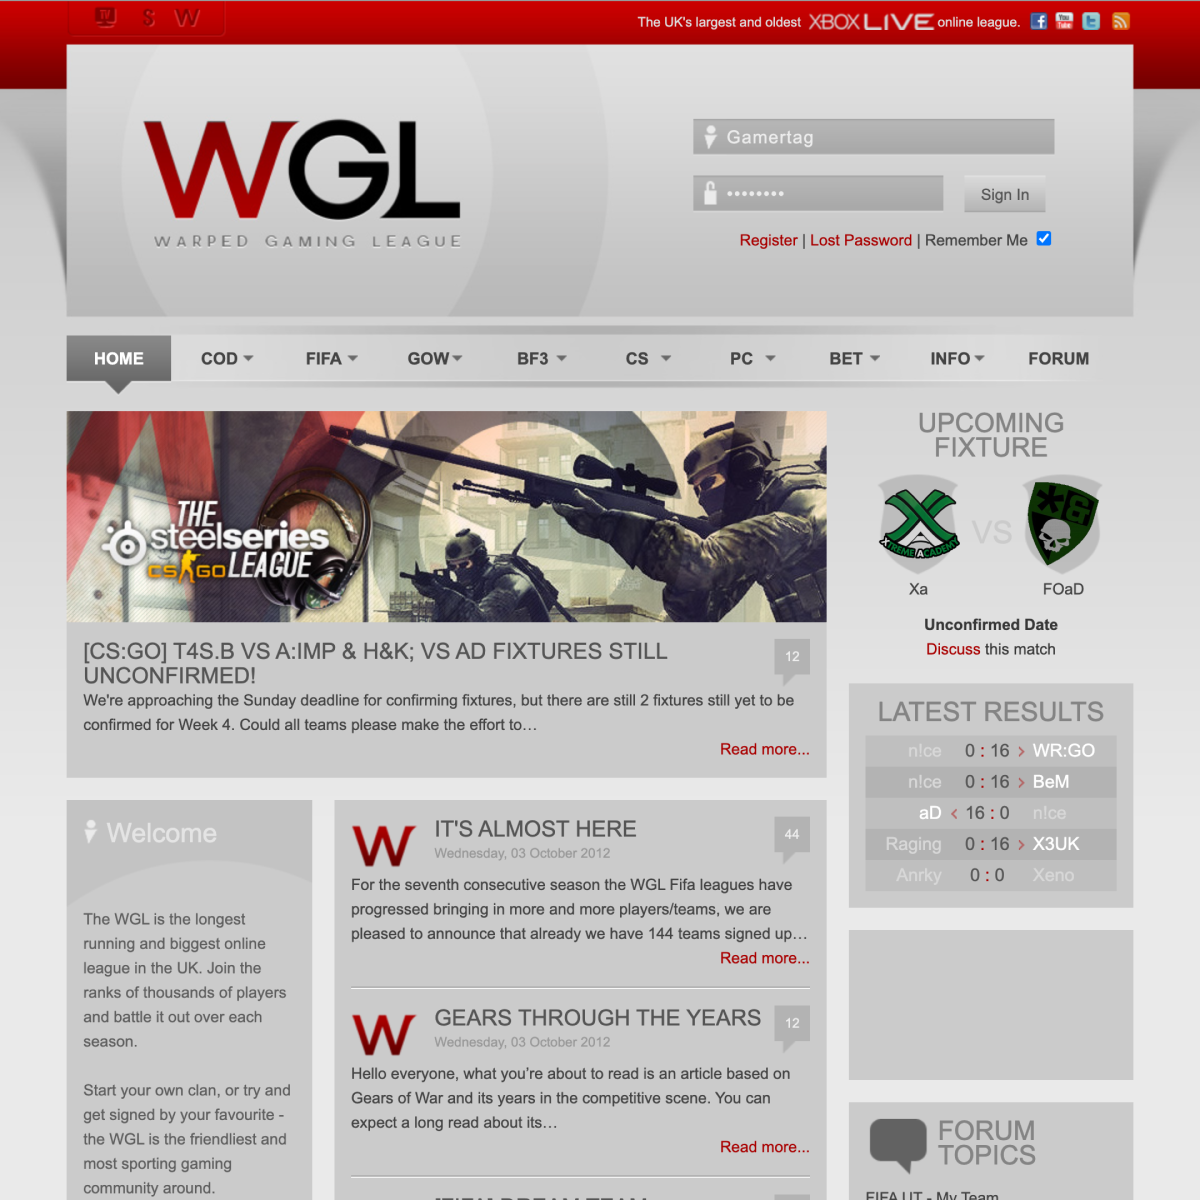 Screenshot of the old Warped Gaming League website. The site features a news feed about Gears of War and CSGO, an upcoming match fixtures list, and an overview of recent forum discussions.